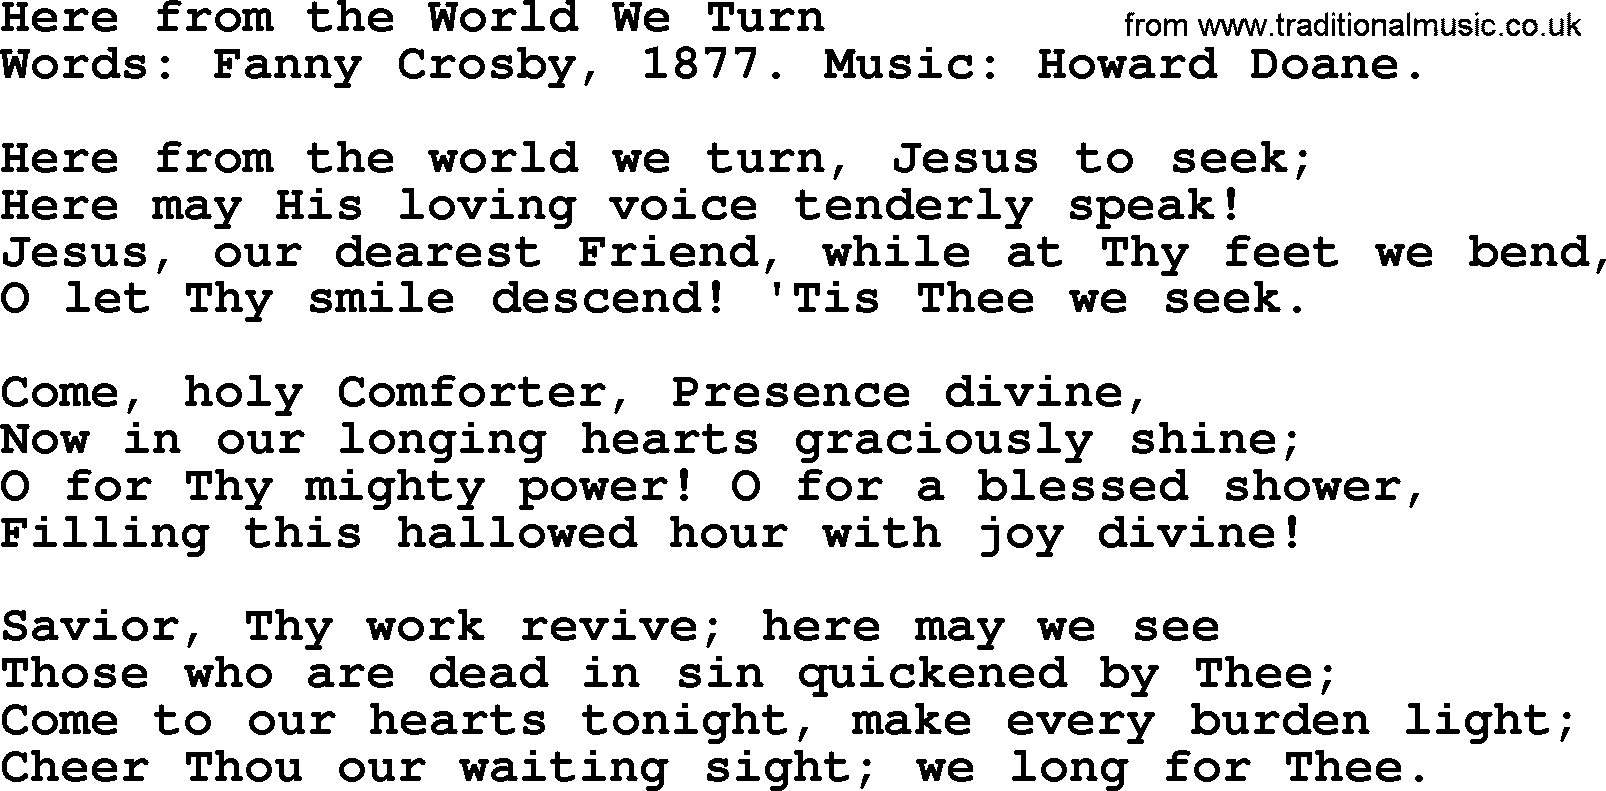 Fanny Crosby song: Here From The World We Turn, lyrics